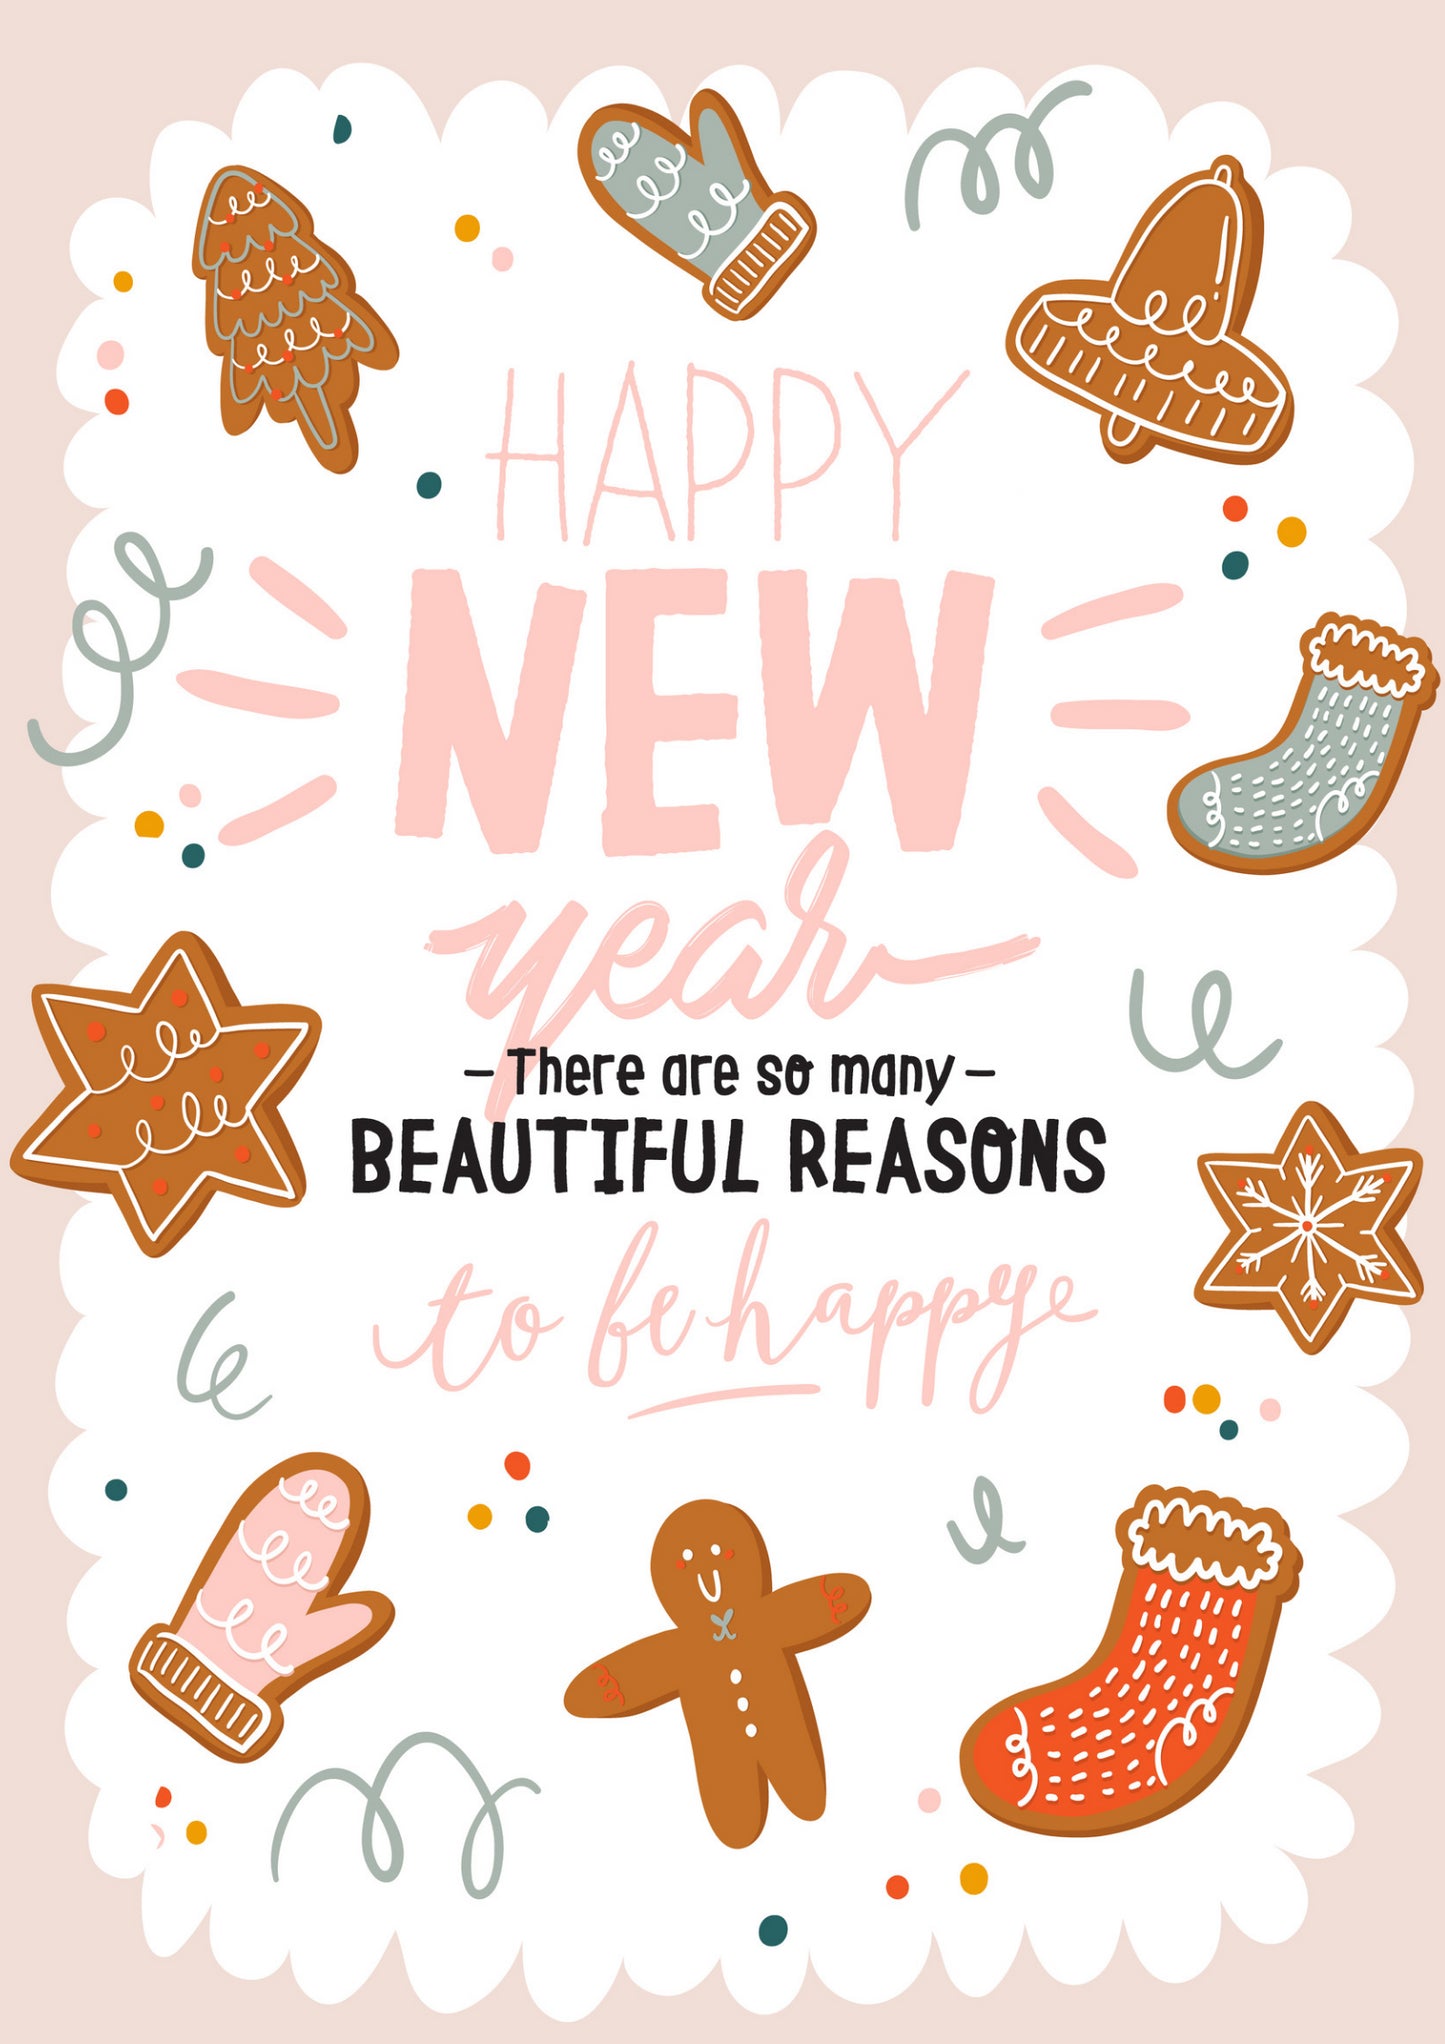 Happy New Year| Poster Fripperies